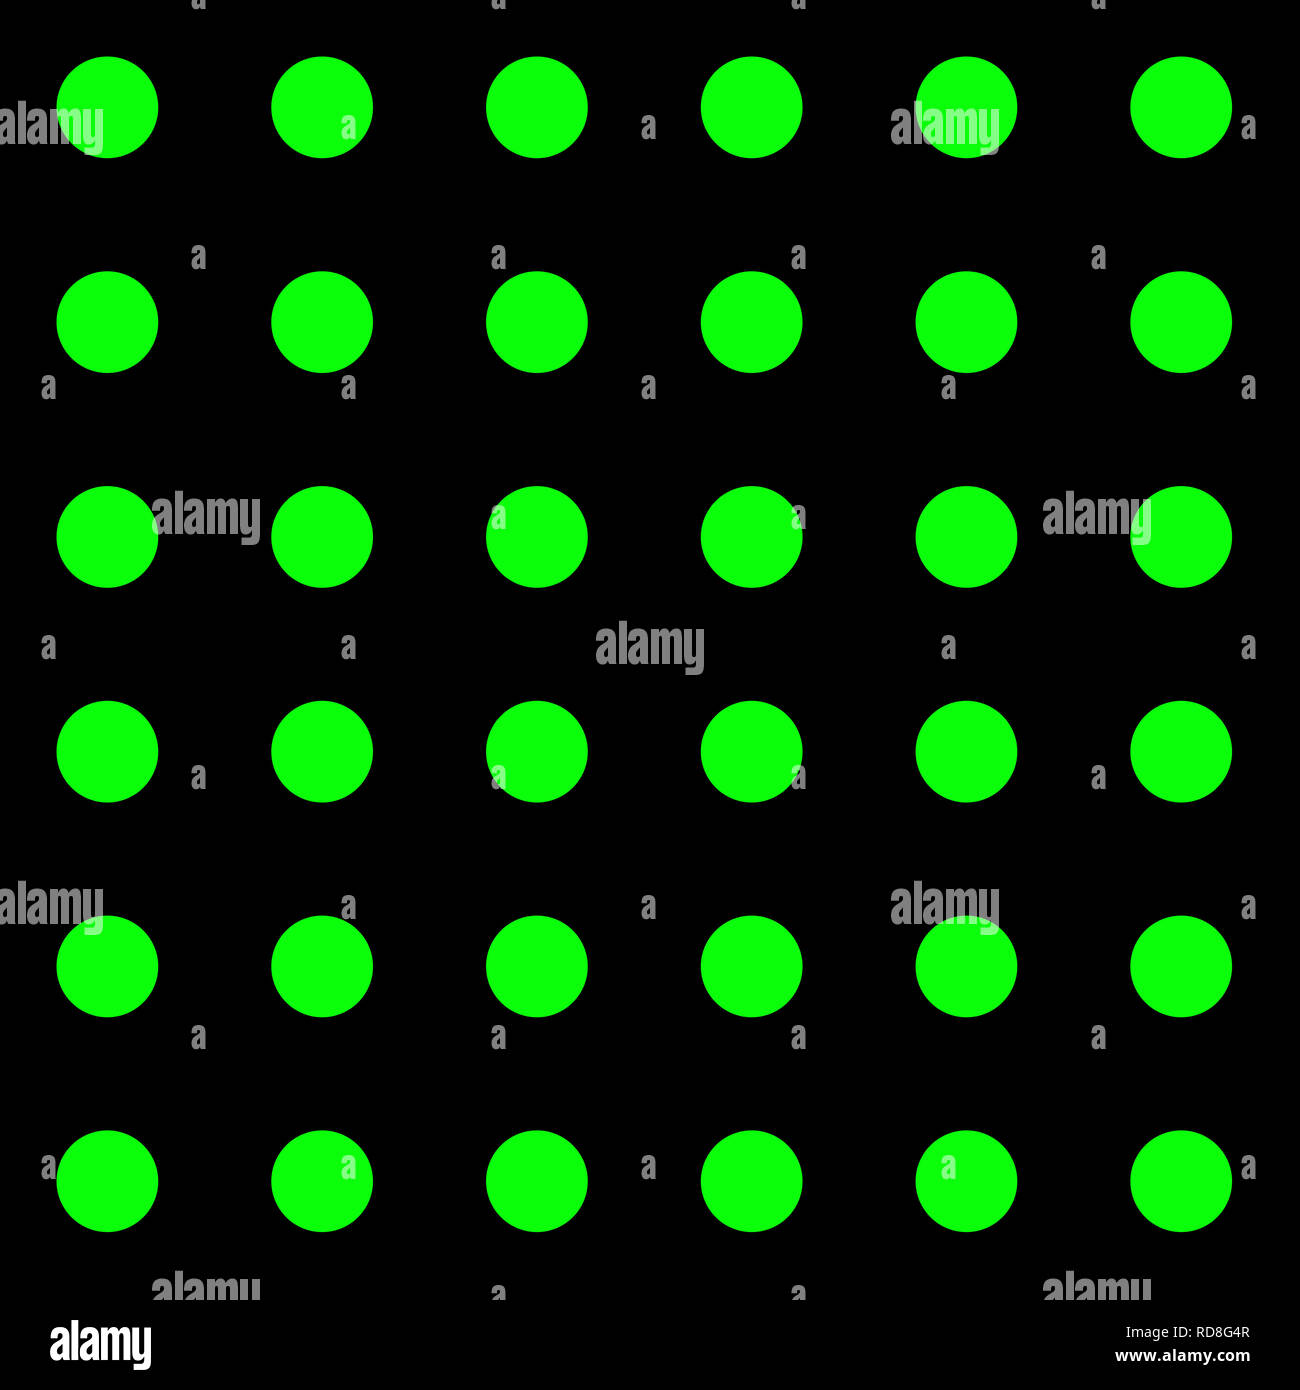 Seamless repeating pattern of big green dots on a black background Stock Photo